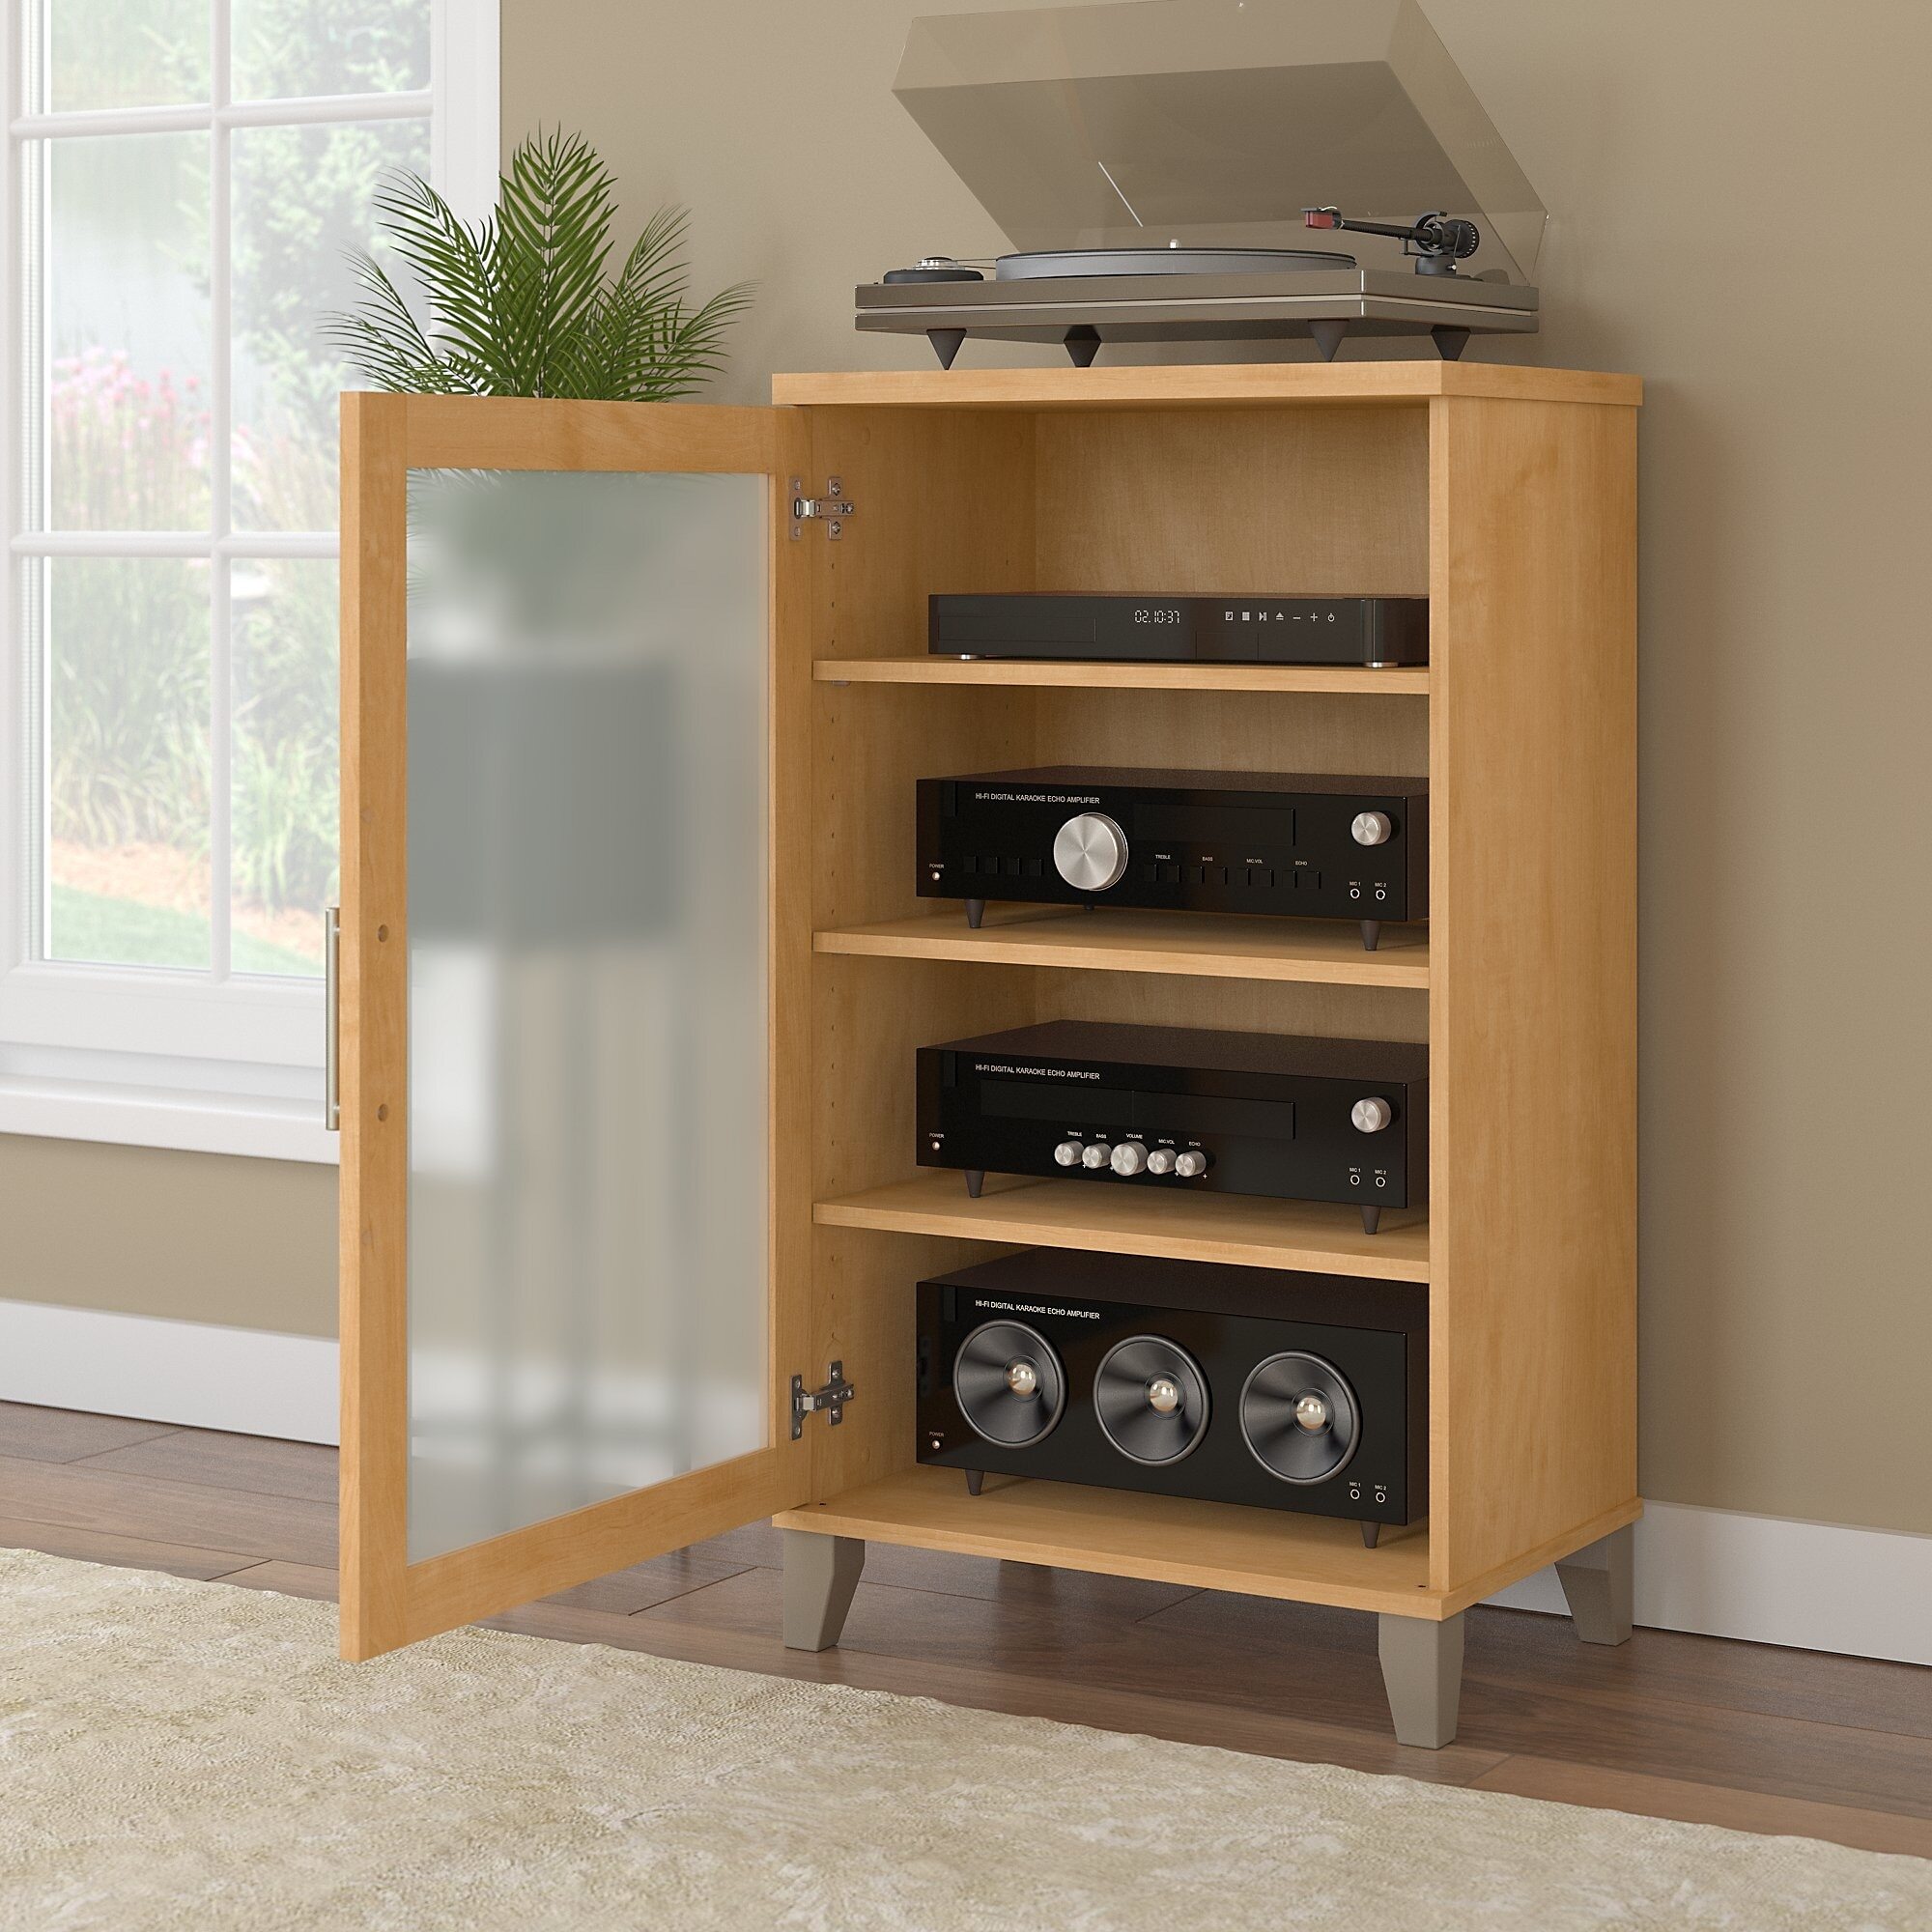 Modernize a Stereo Cabinet with Glass Doors with Accessories